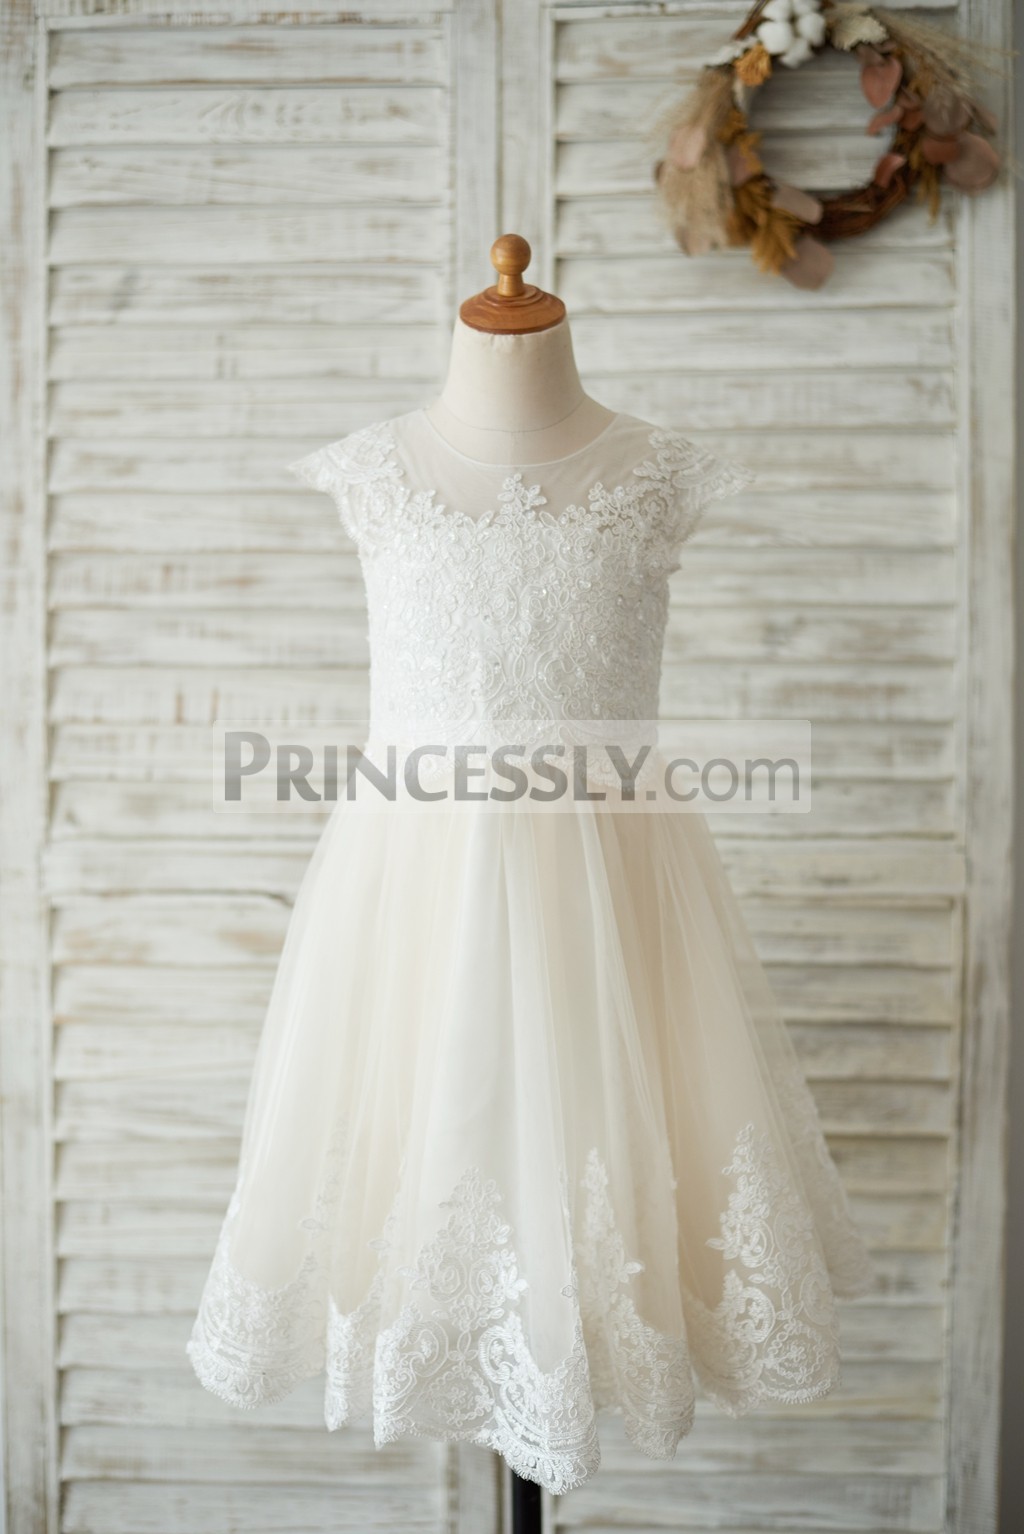 Princessly.com-K1003535-Ivory Lace Champagne tulle Cap Sleeves Wedding Flower Girl Dress with Beading-31